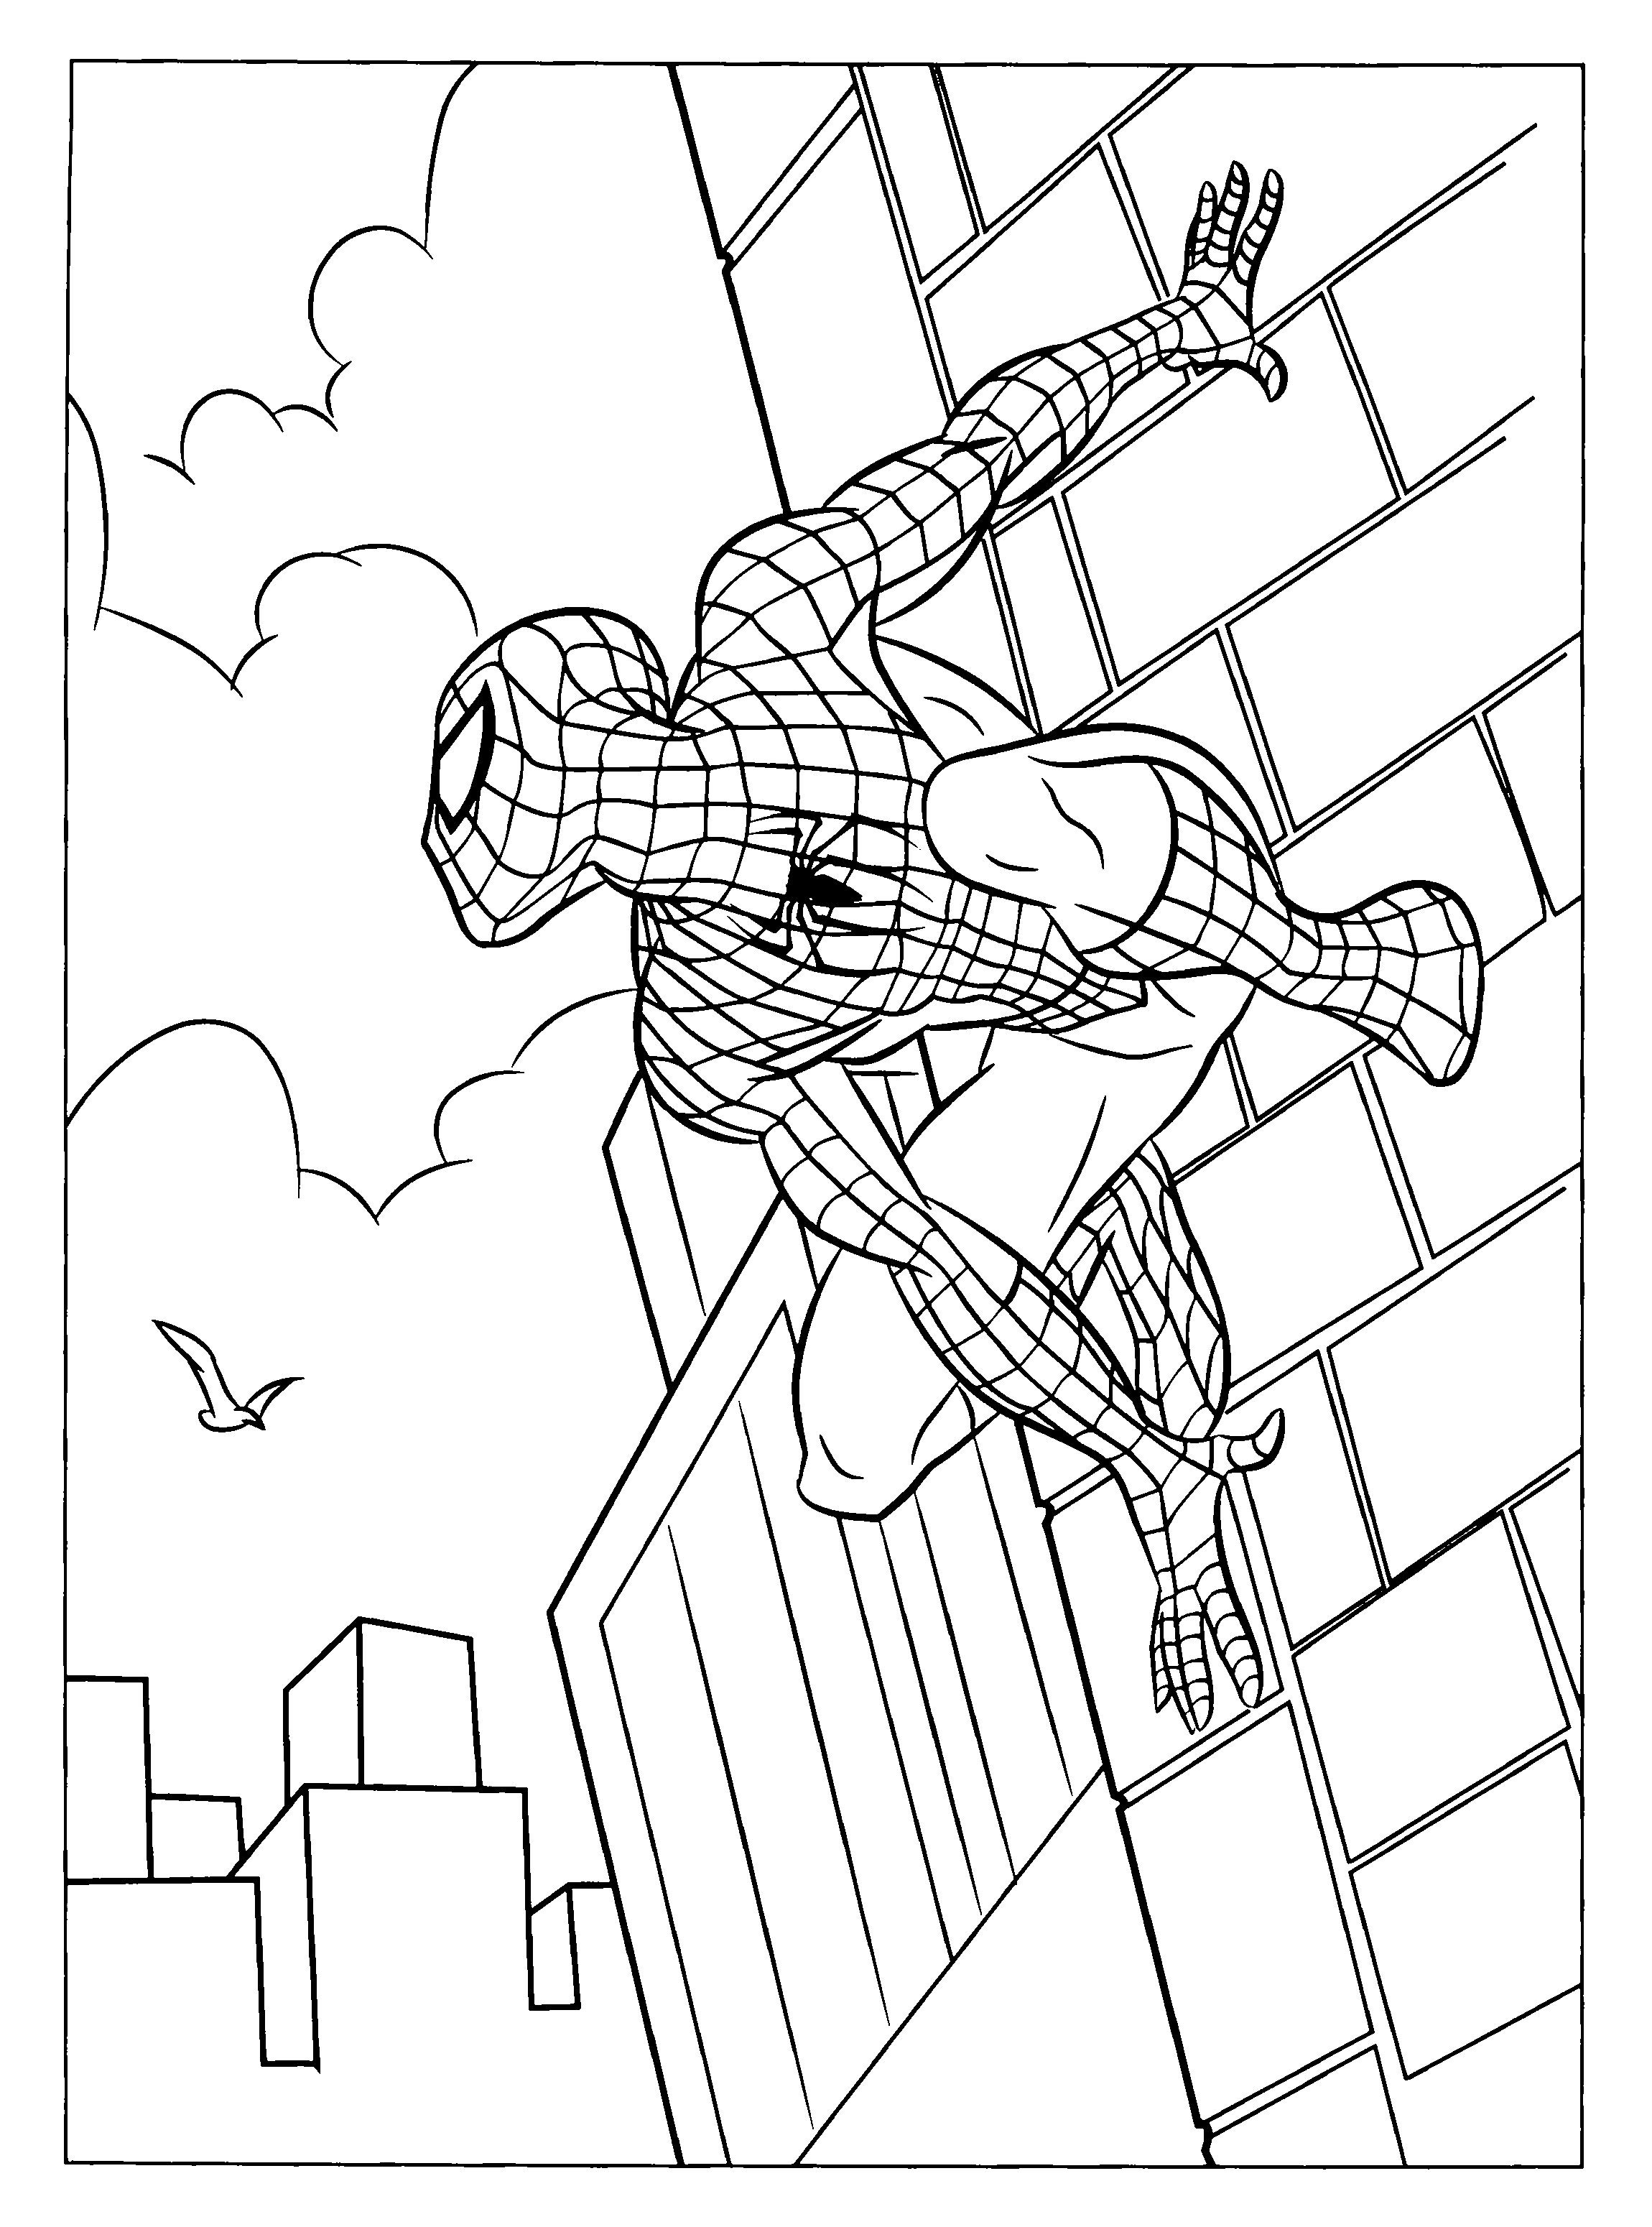 Spiderman 3 coloriages